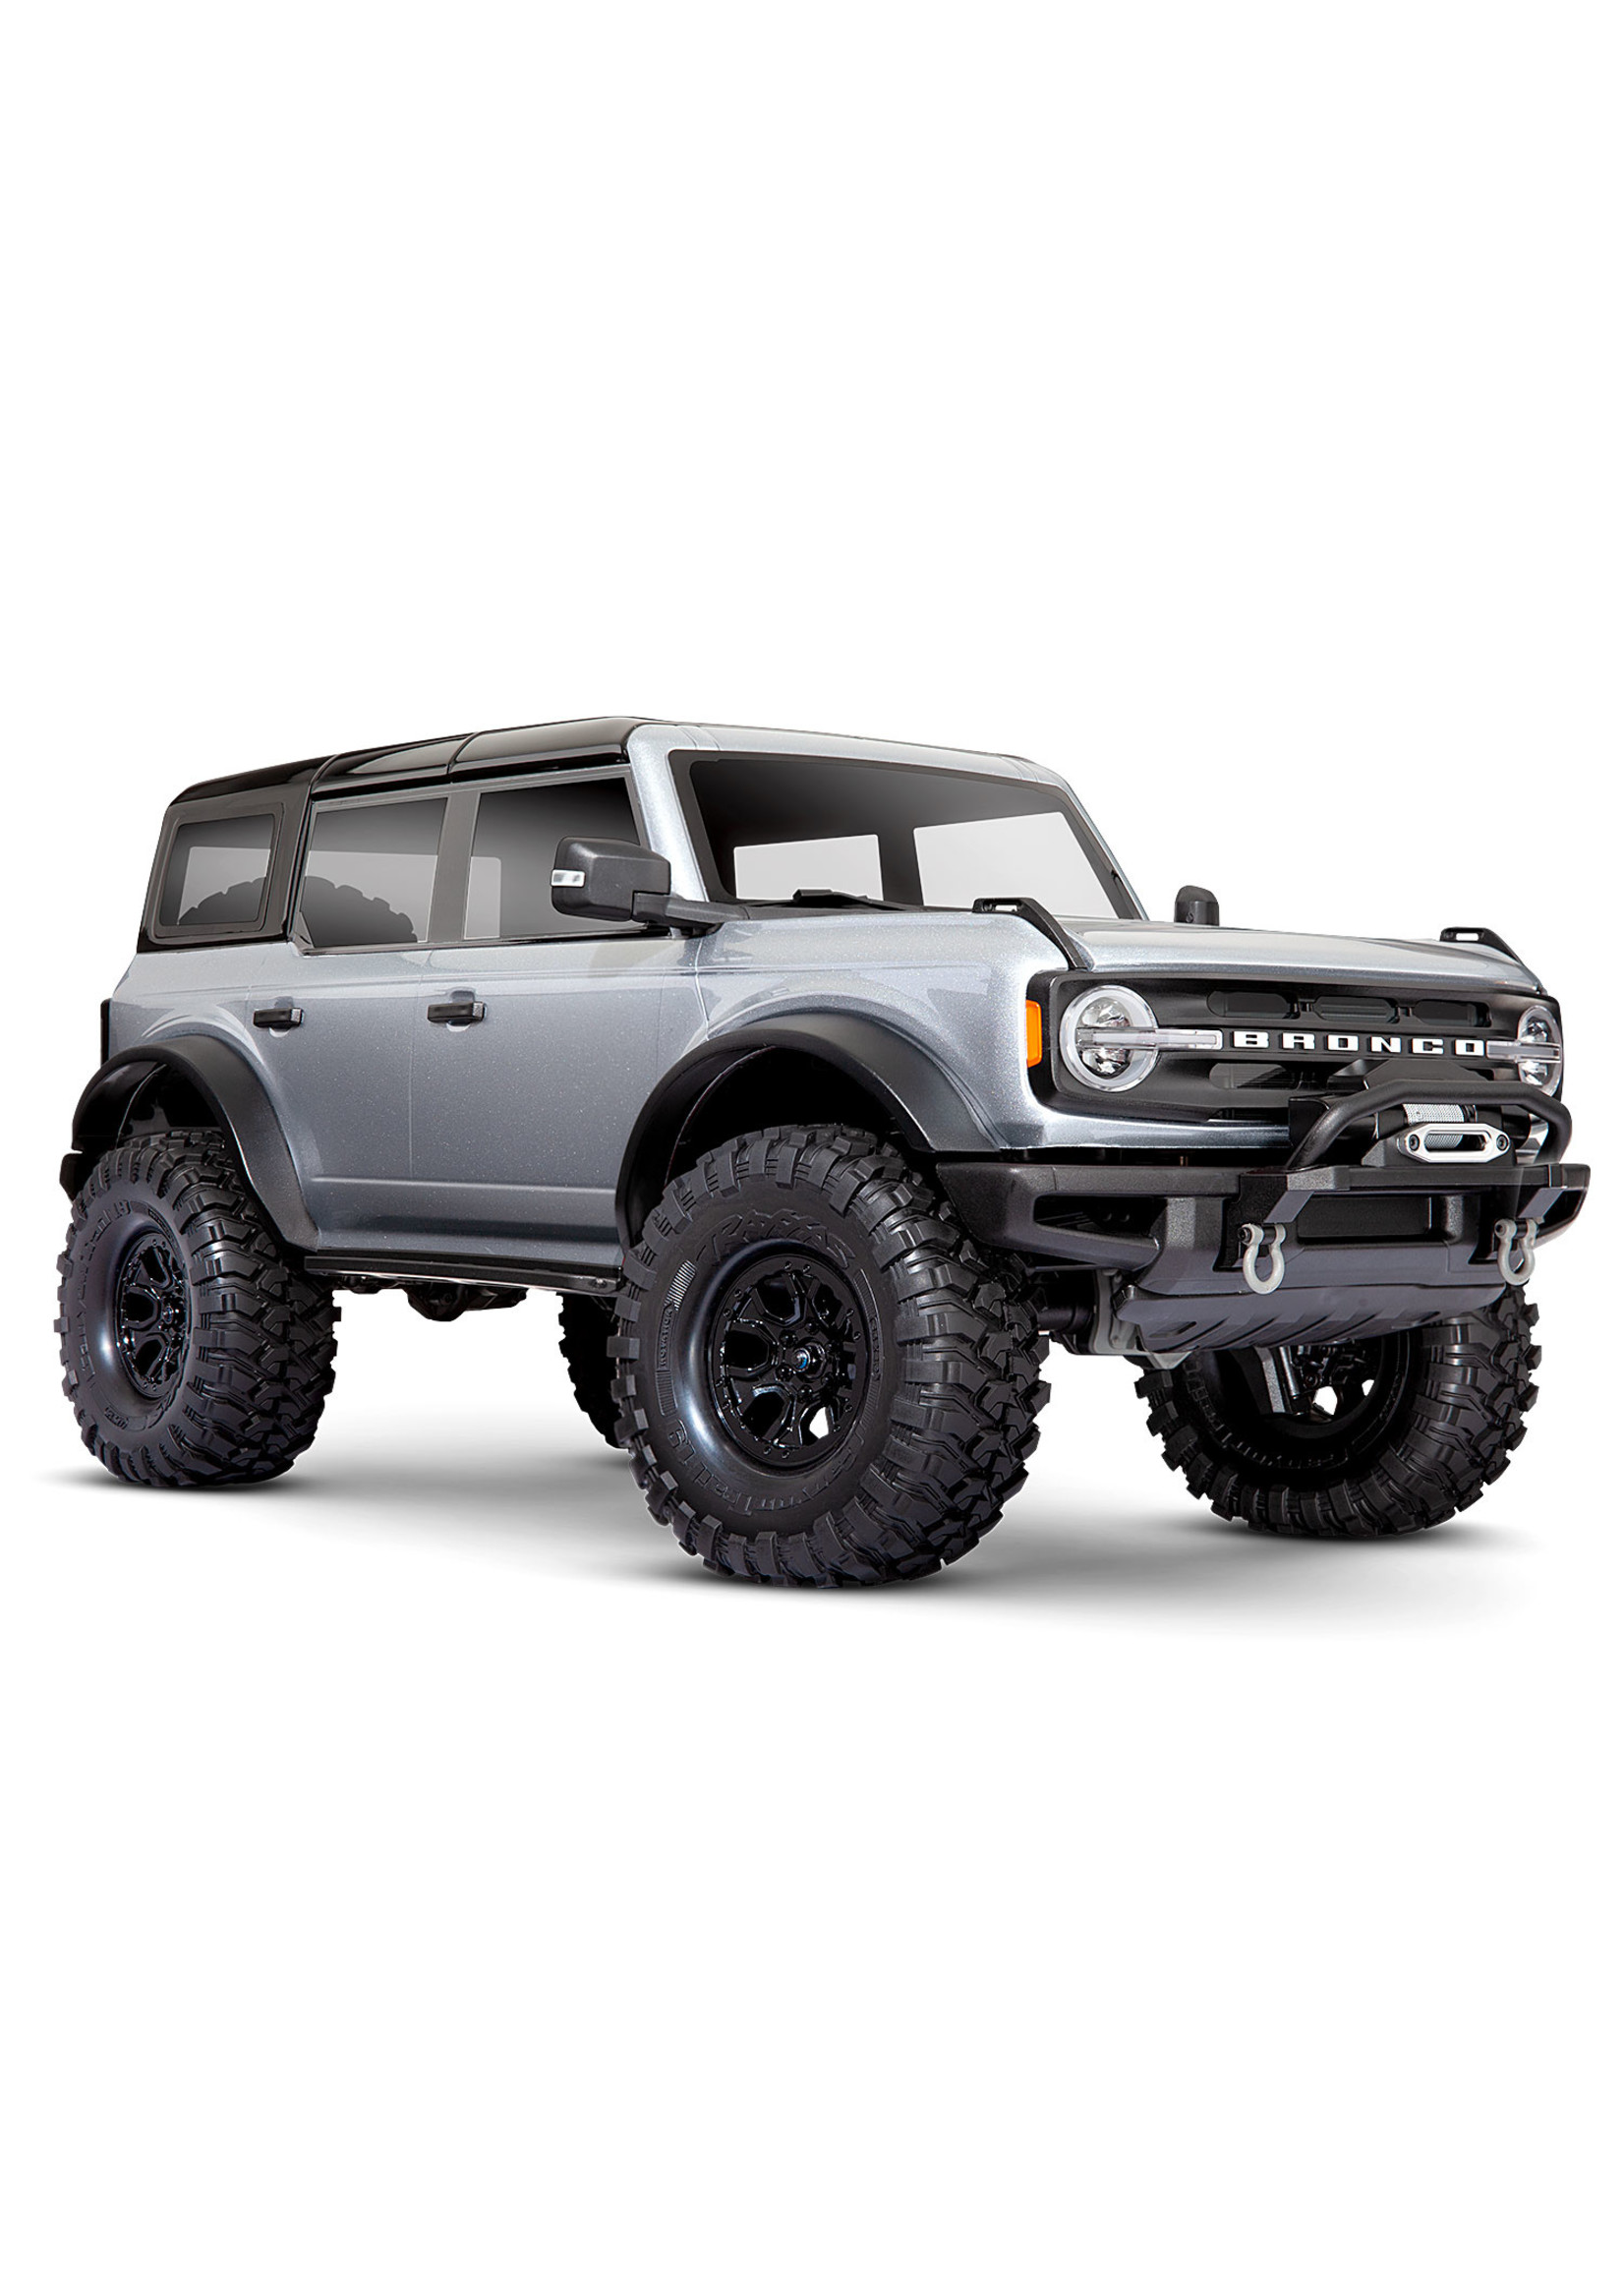 Traxxas 1/10 TRX-4 2021 Bronco Scale and Trail Crawler RTR - Iconic Silver